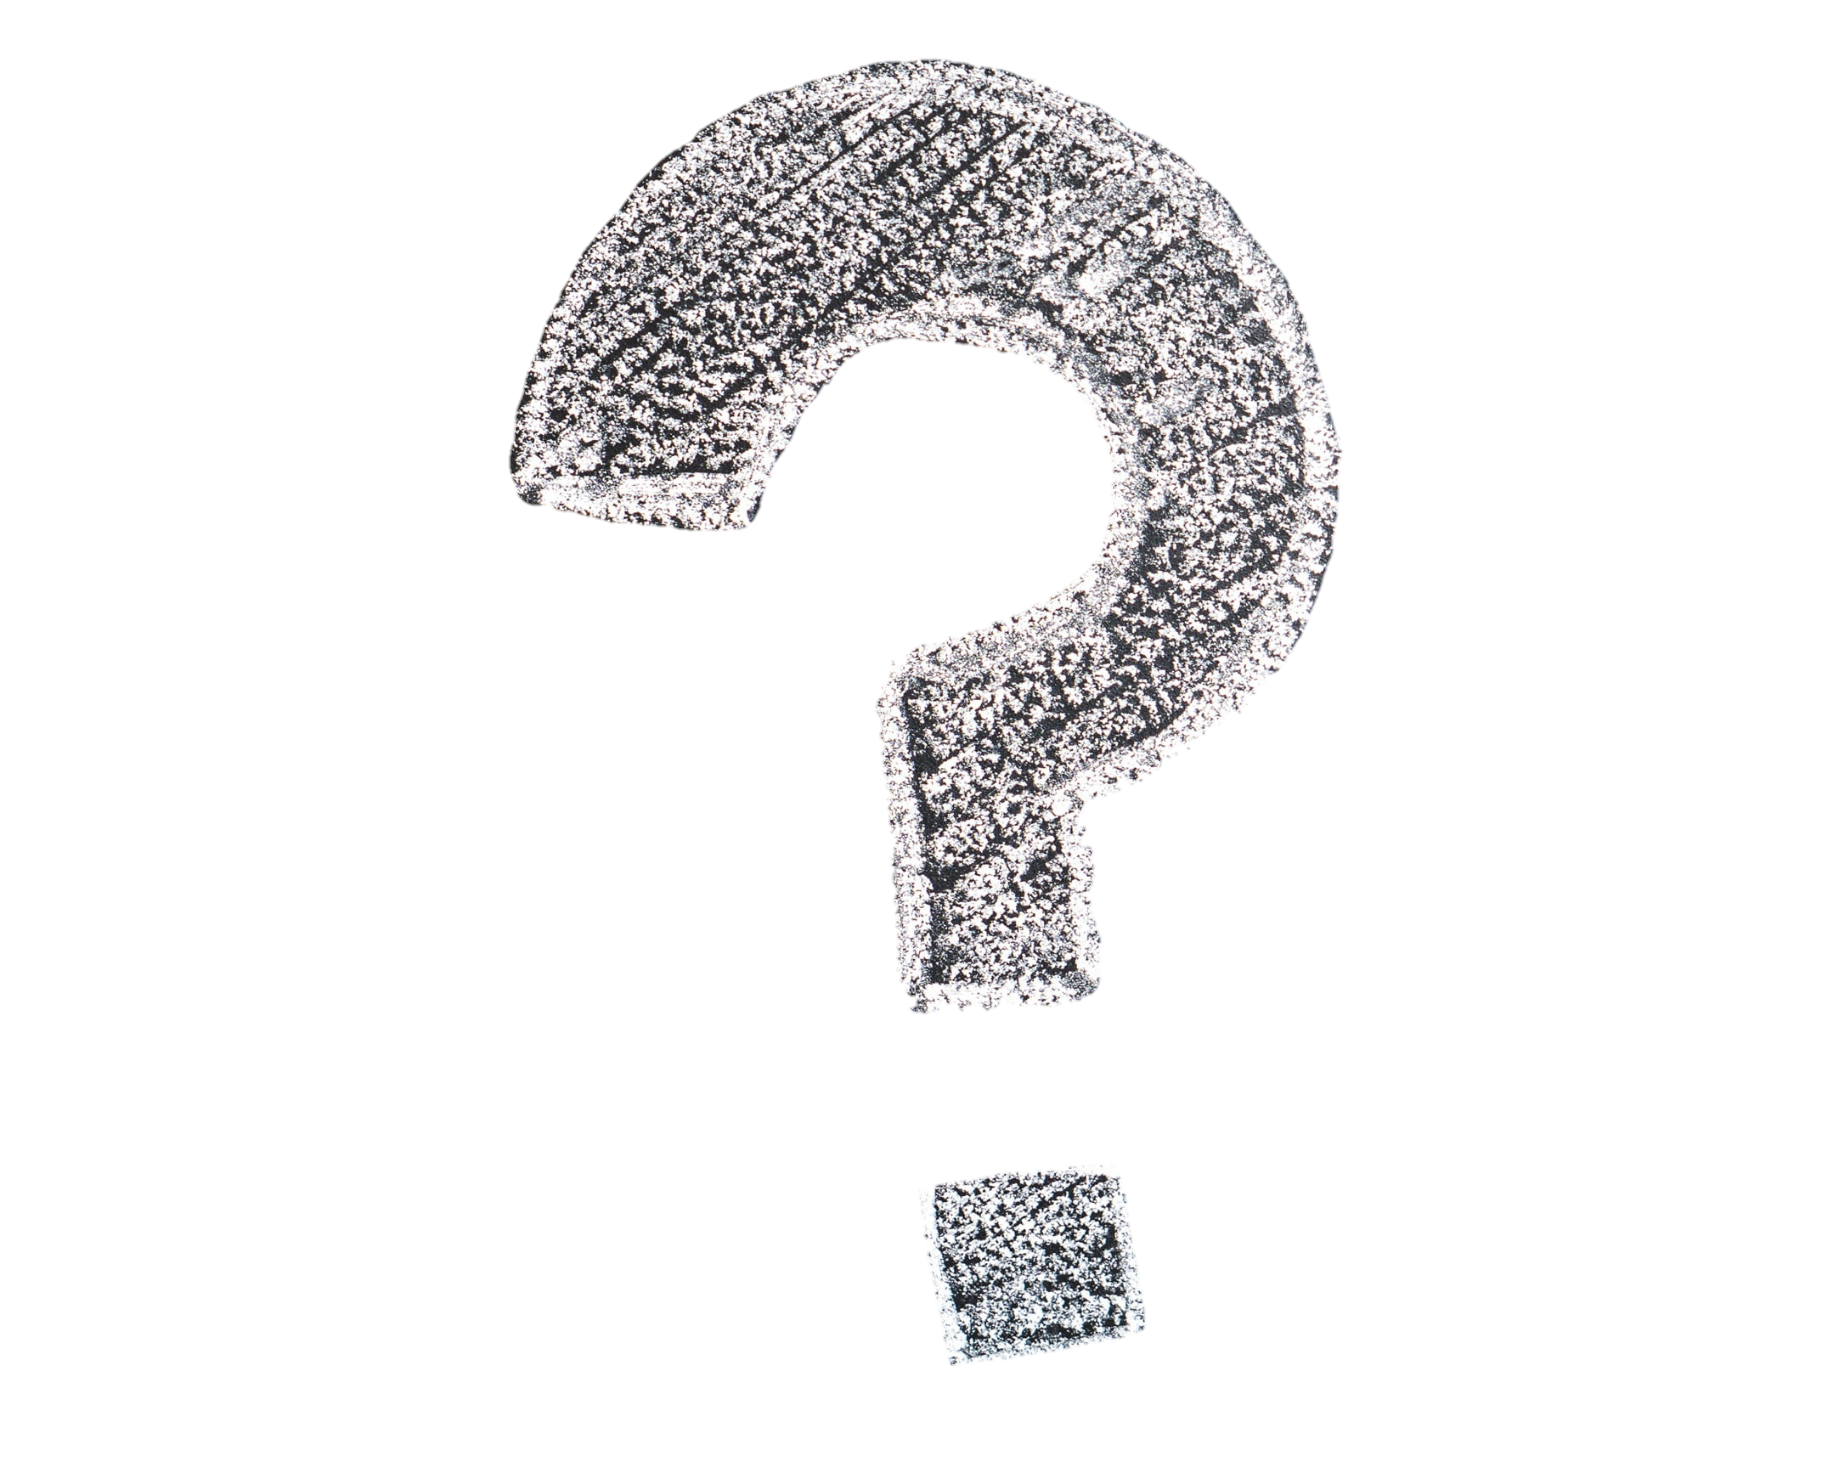 question-mark-png-from-pngfre-11